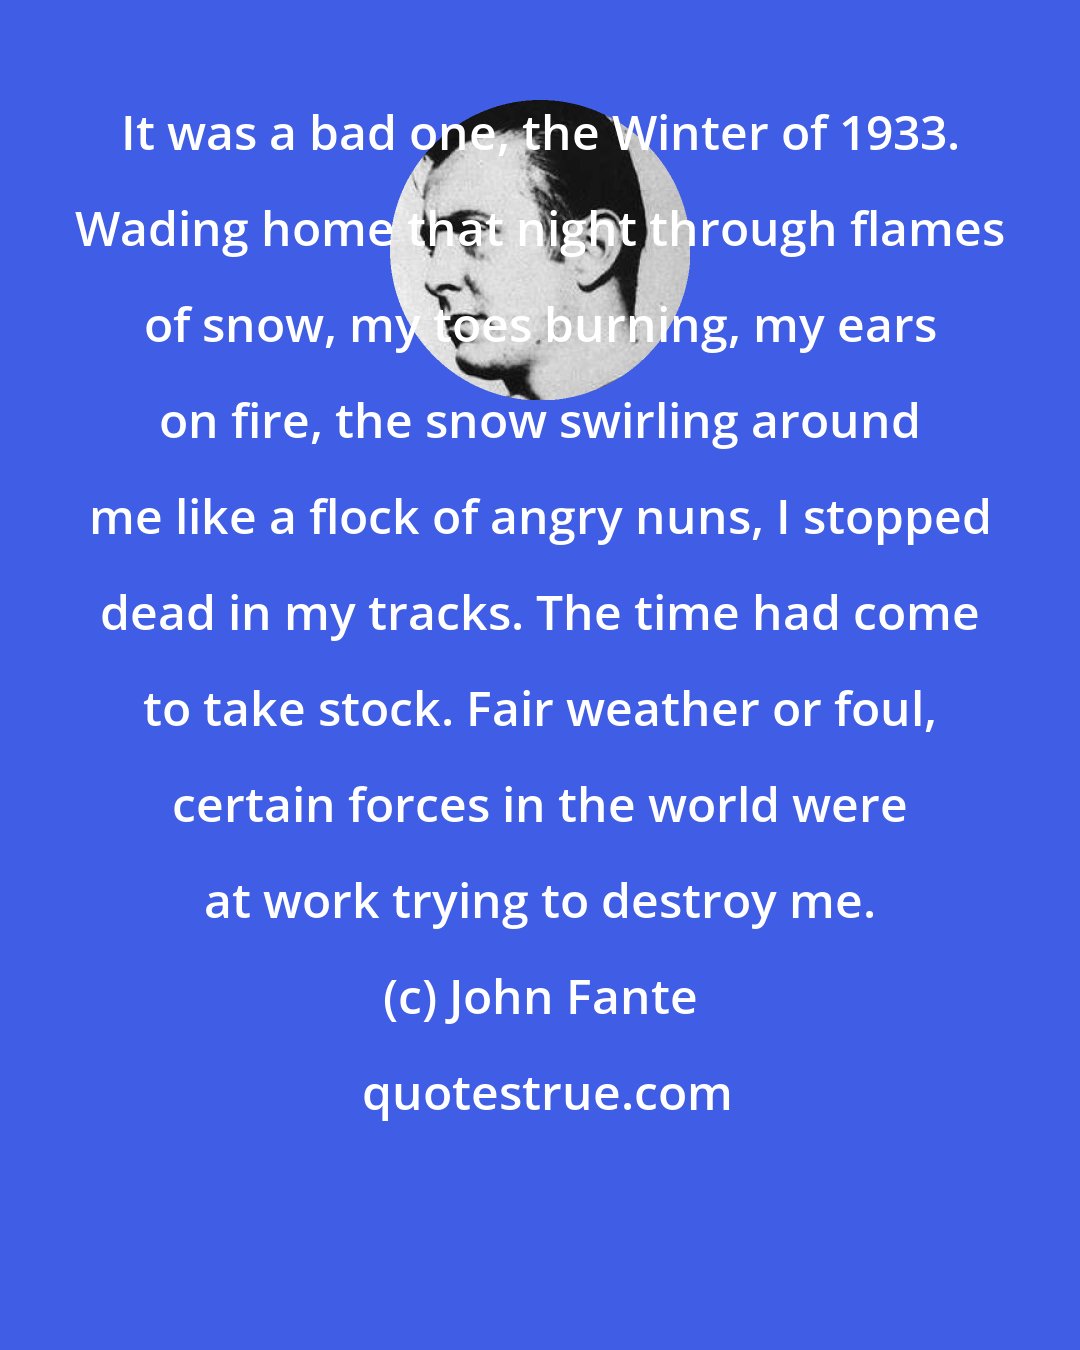 John Fante: It was a bad one, the Winter of 1933. Wading home that night through flames of snow, my toes burning, my ears on fire, the snow swirling around me like a flock of angry nuns, I stopped dead in my tracks. The time had come to take stock. Fair weather or foul, certain forces in the world were at work trying to destroy me.